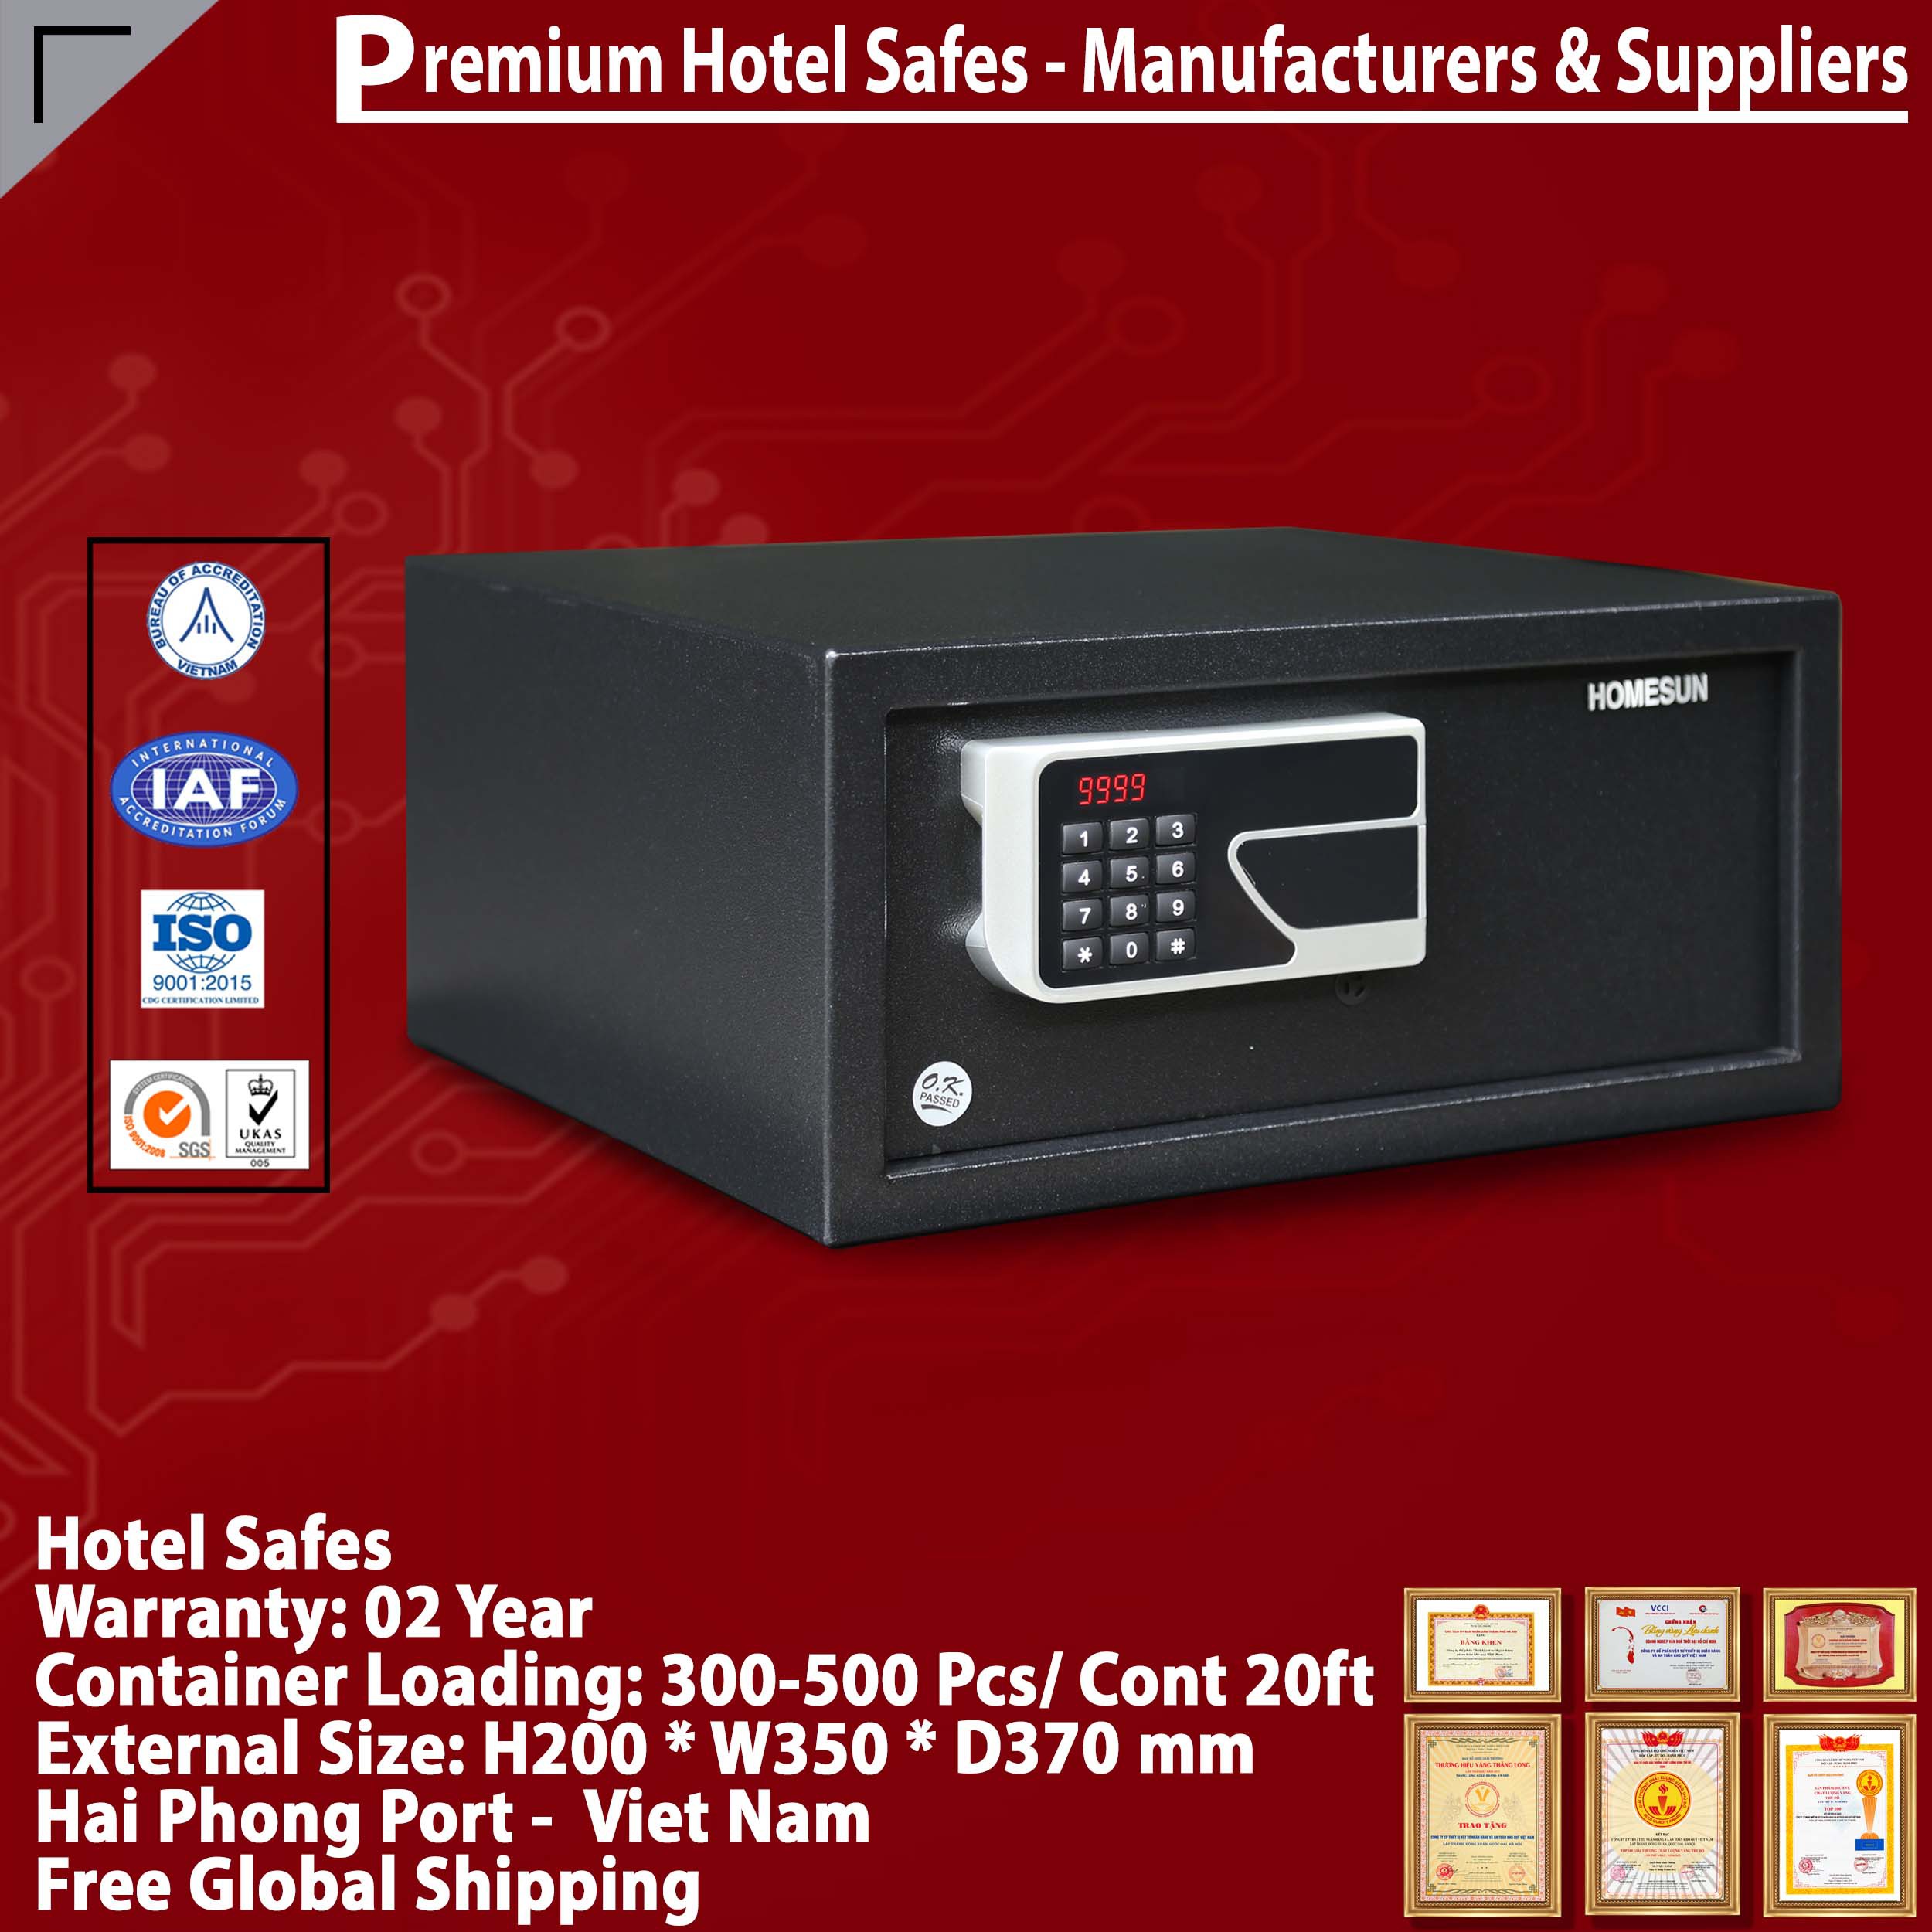 Used Hotel Safes Manufacturing Facility